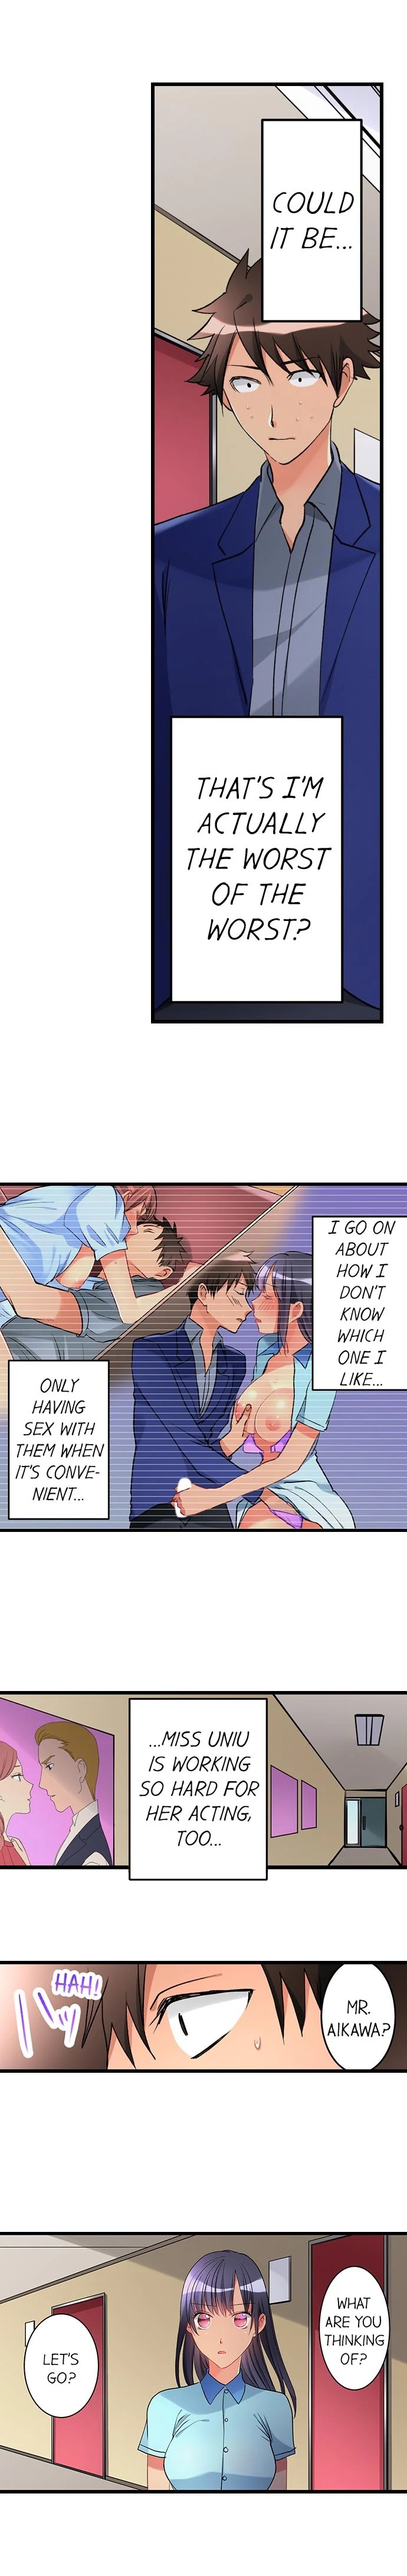 What She Fell On Was the Tip of My Dick - Chapter 36 Page 6